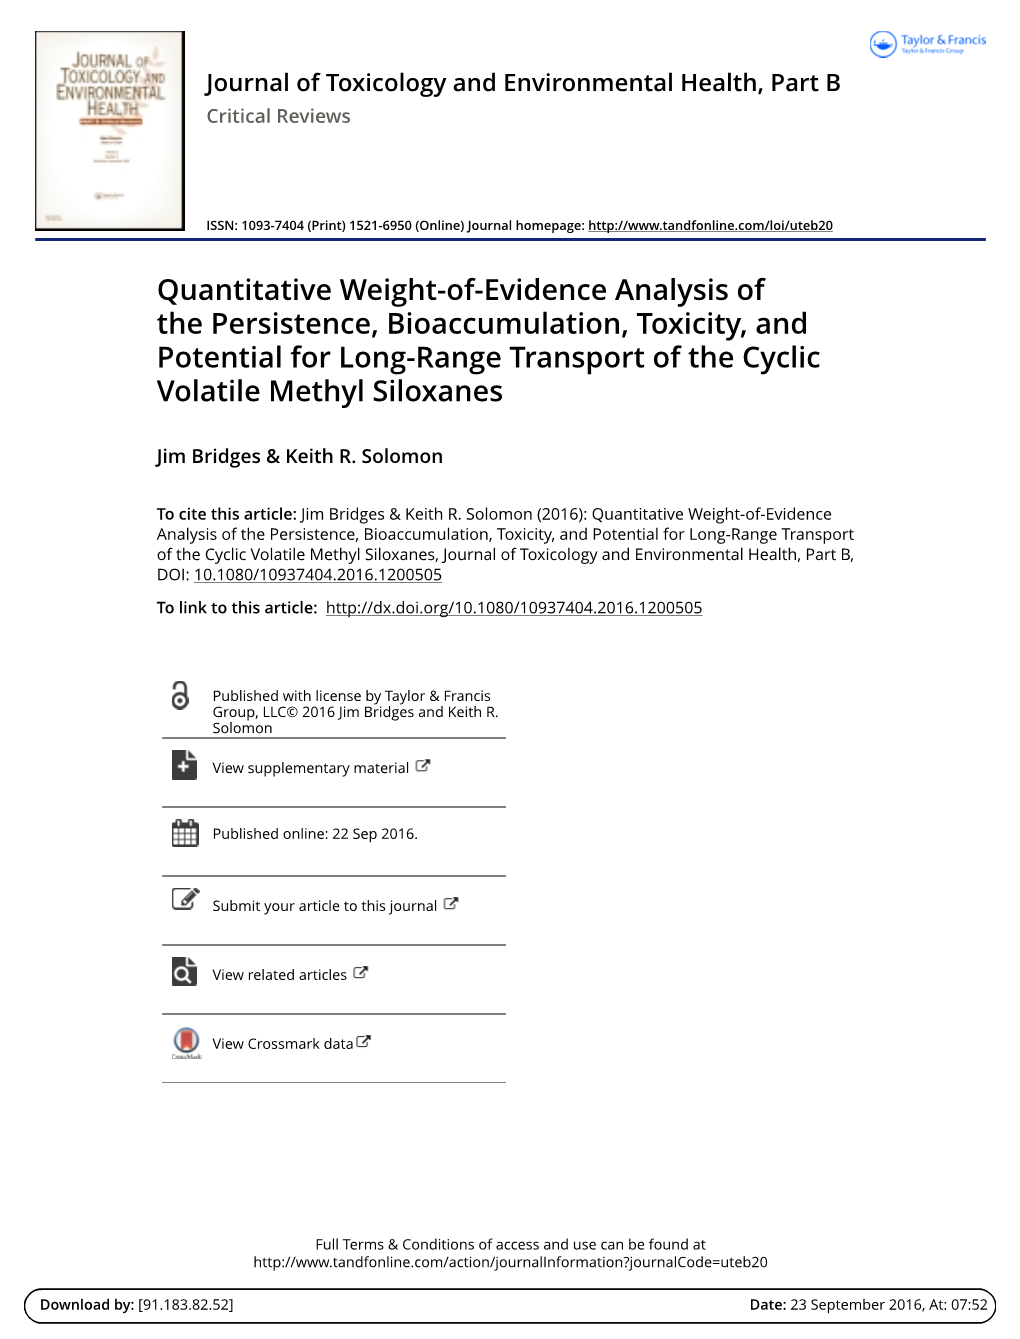 Quantitative Weight-Of-Evidence Analysis of the Persistence, Bioaccumulation, Toxicity, and Potential for Long-Range Transport of the Cyclic Volatile Methyl Siloxanes